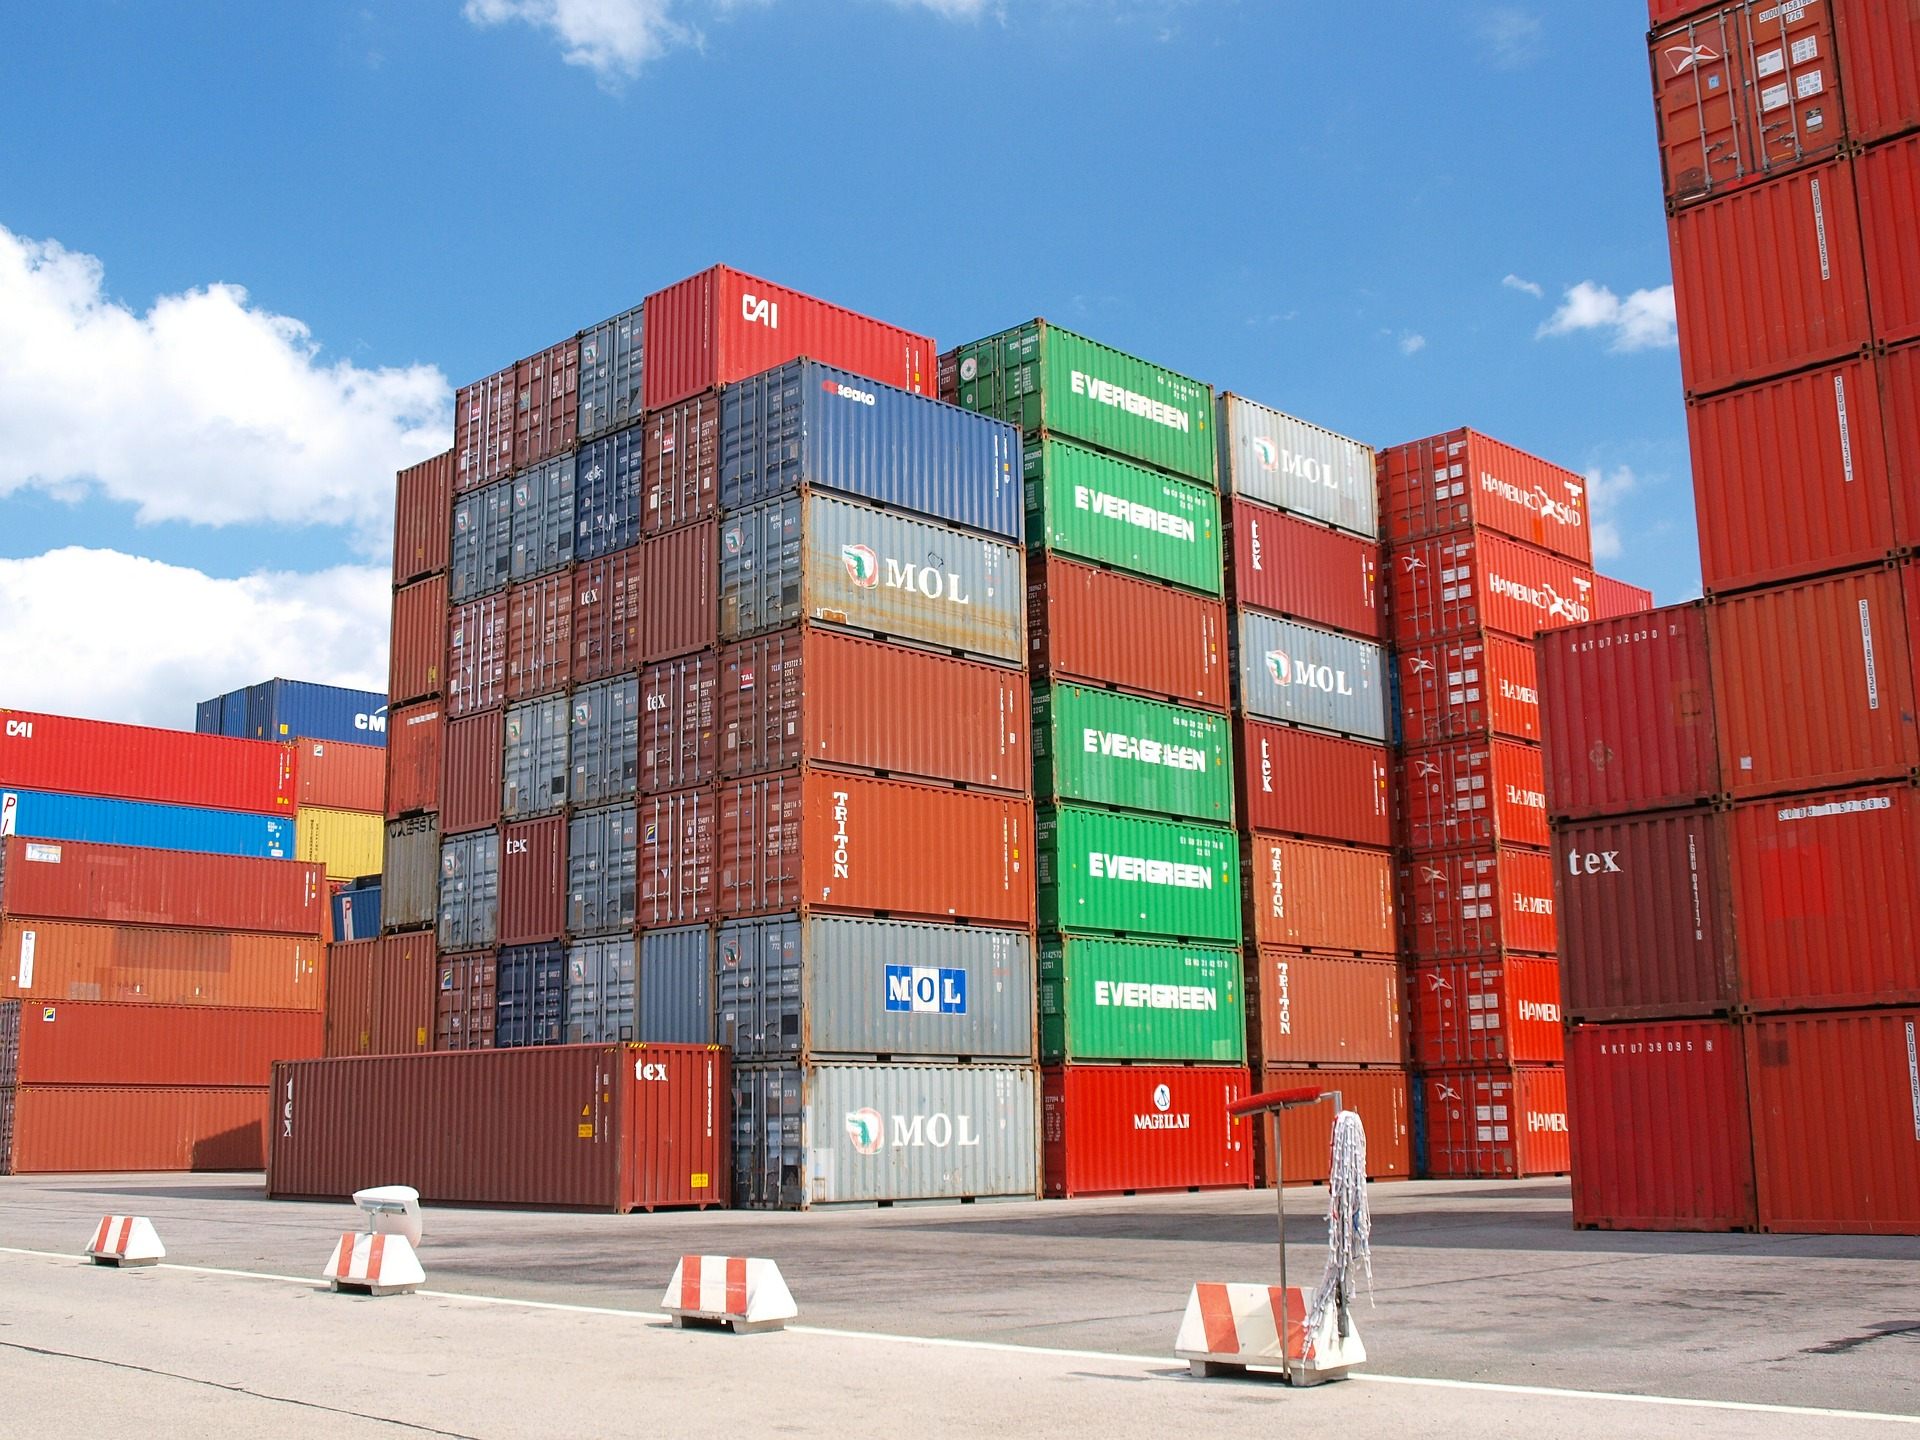 Shipping Container HD Wallpaper for free download in 1920x1440p